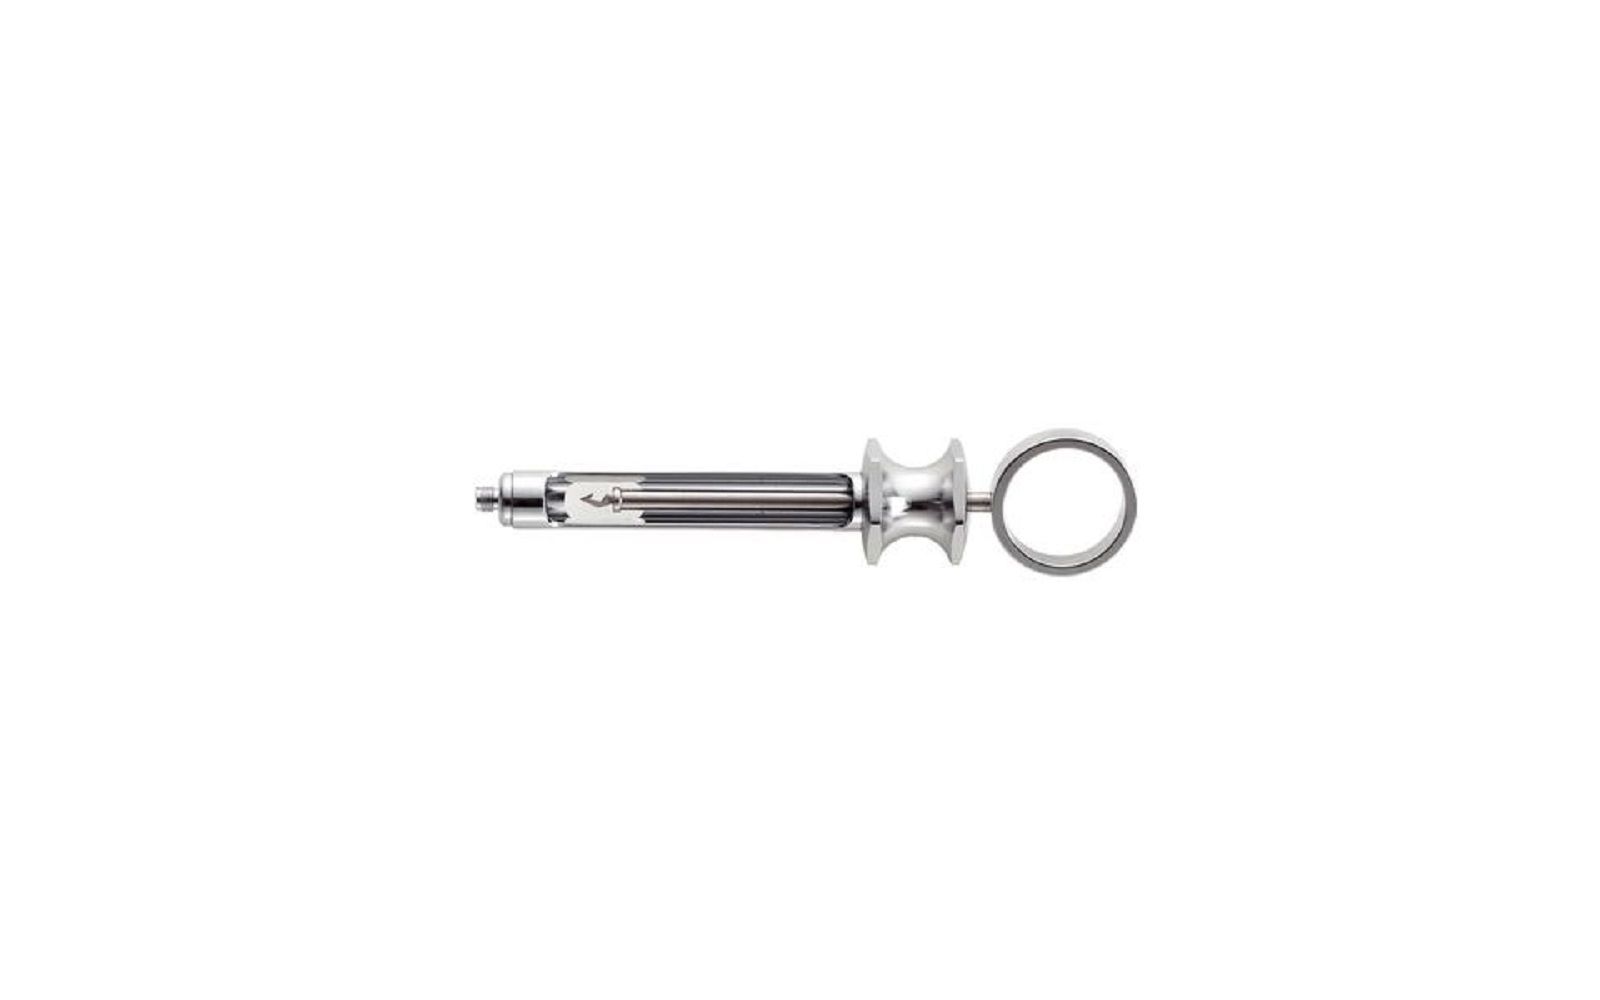 Patterson® aspirating syringes – 1. 8 ml cartridge, made in germany - patterson dental supply